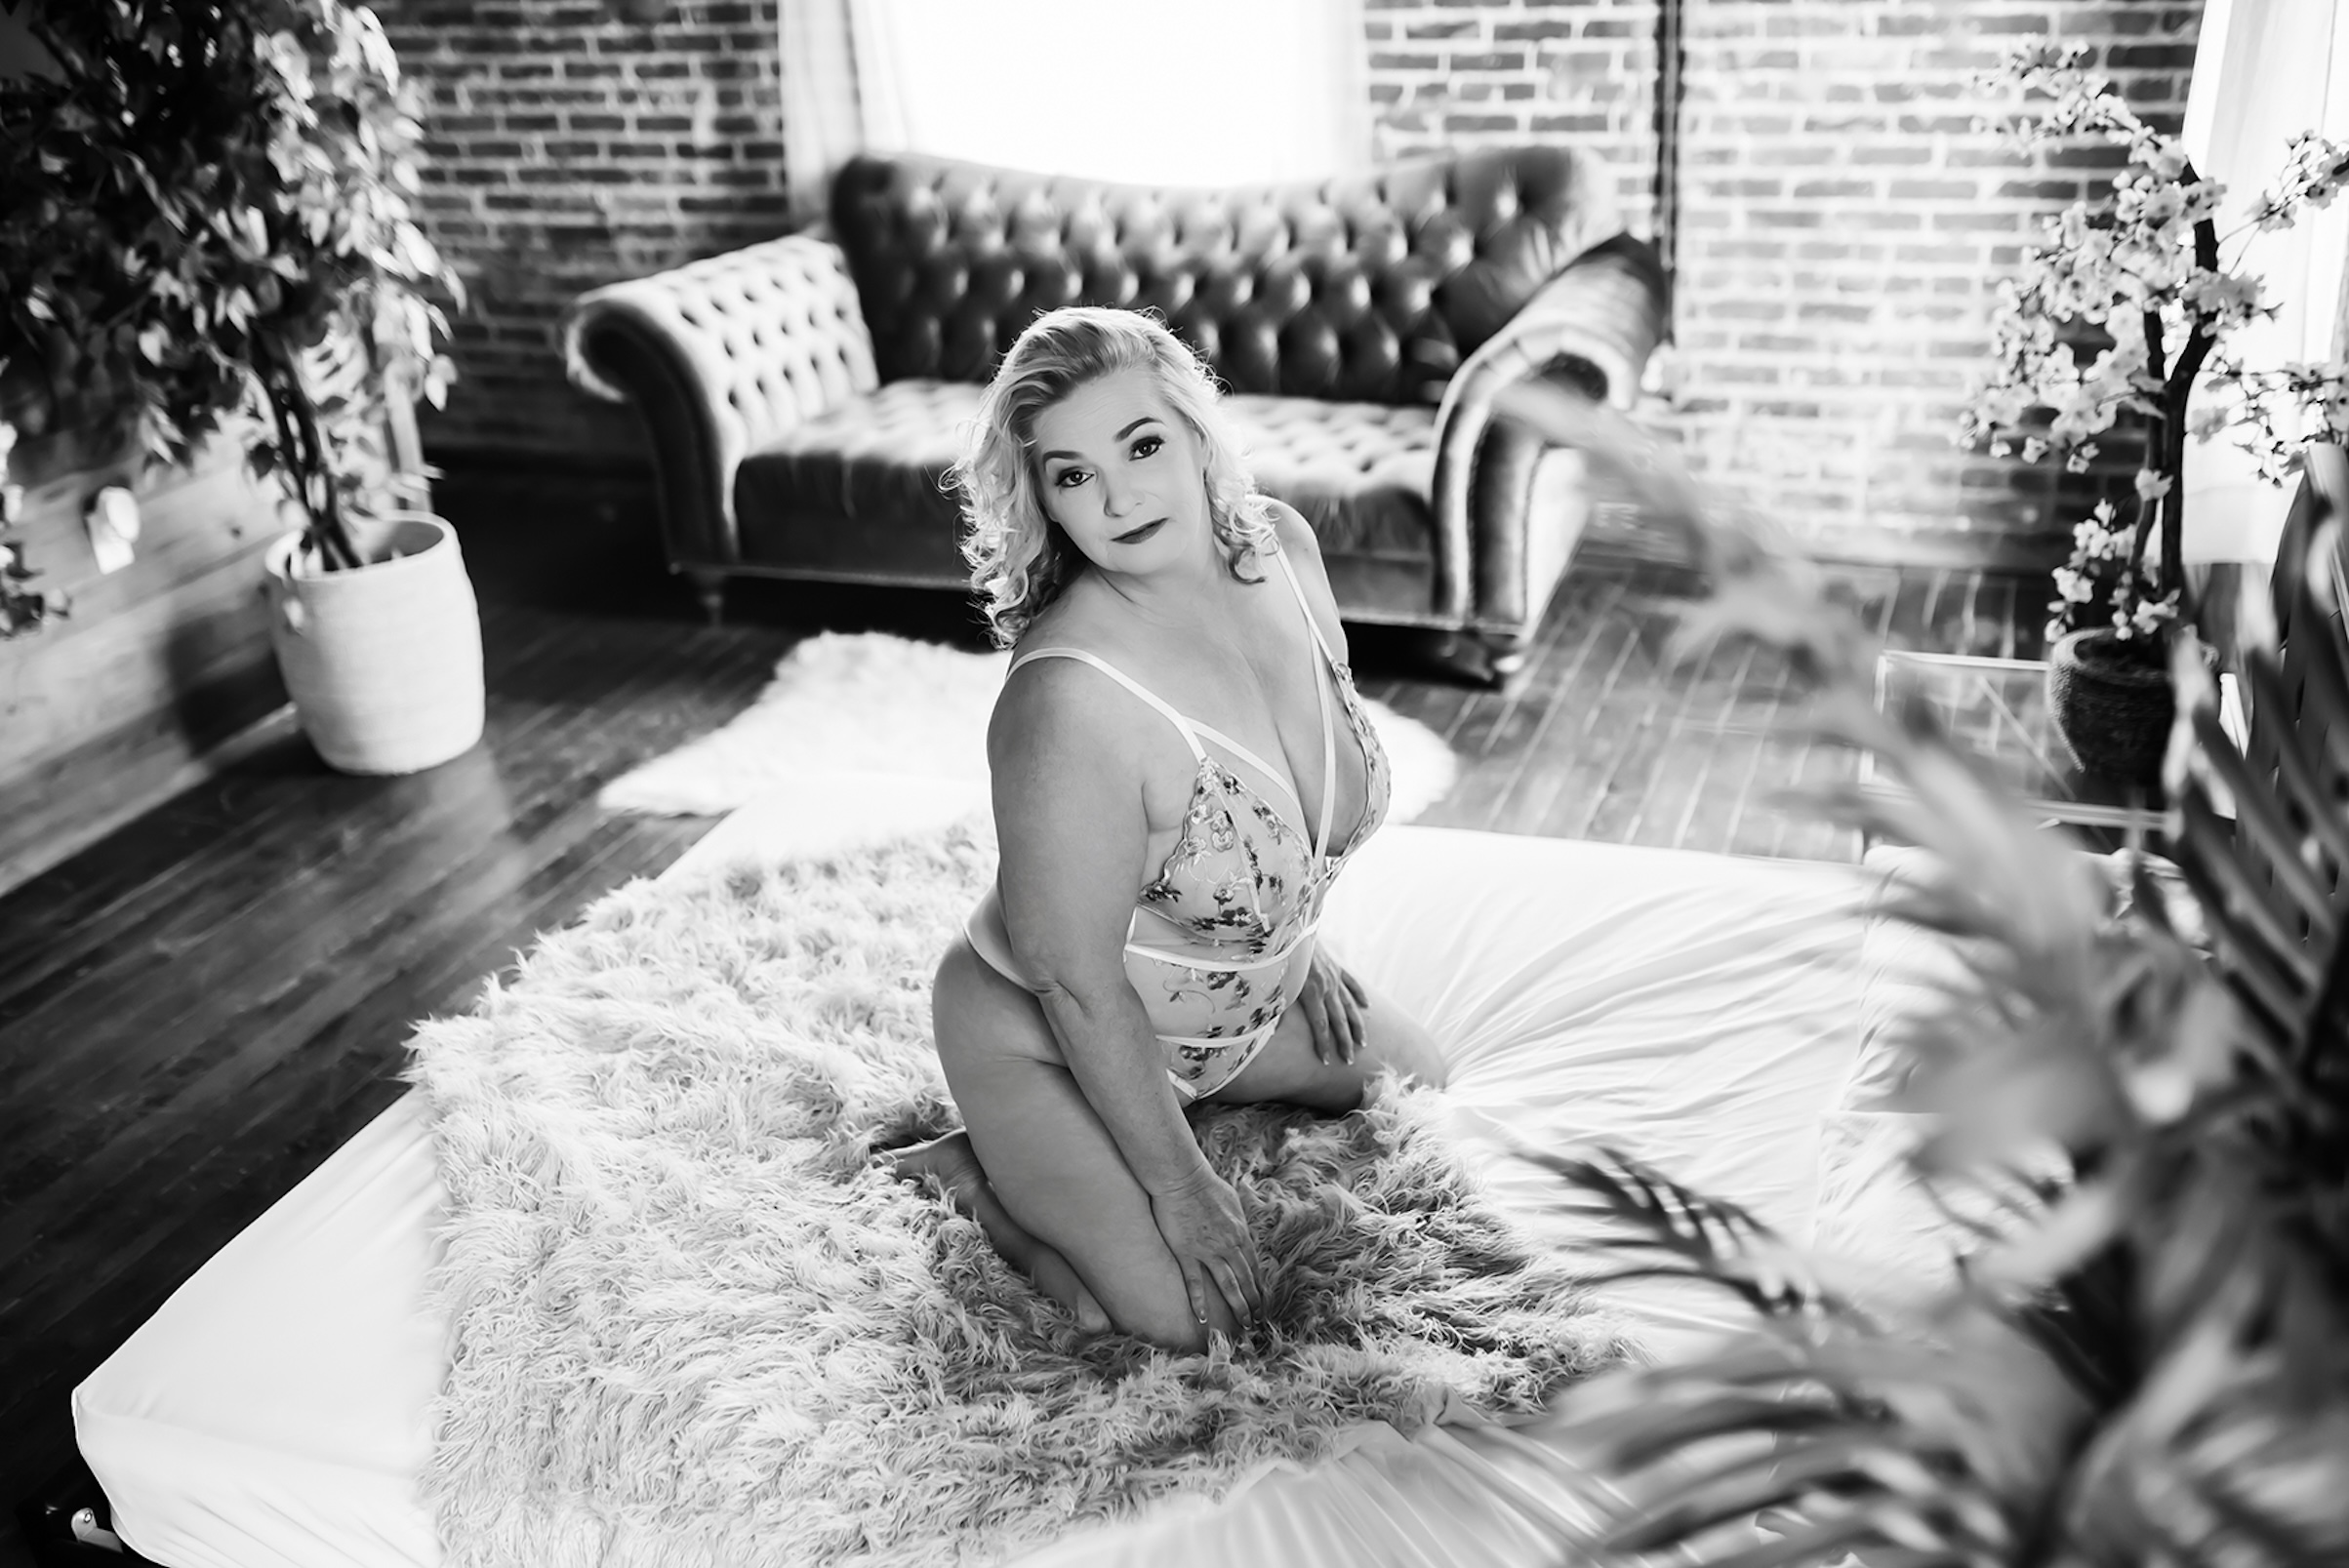 black and white photo of woman in lingerie, kneeling on fur rug